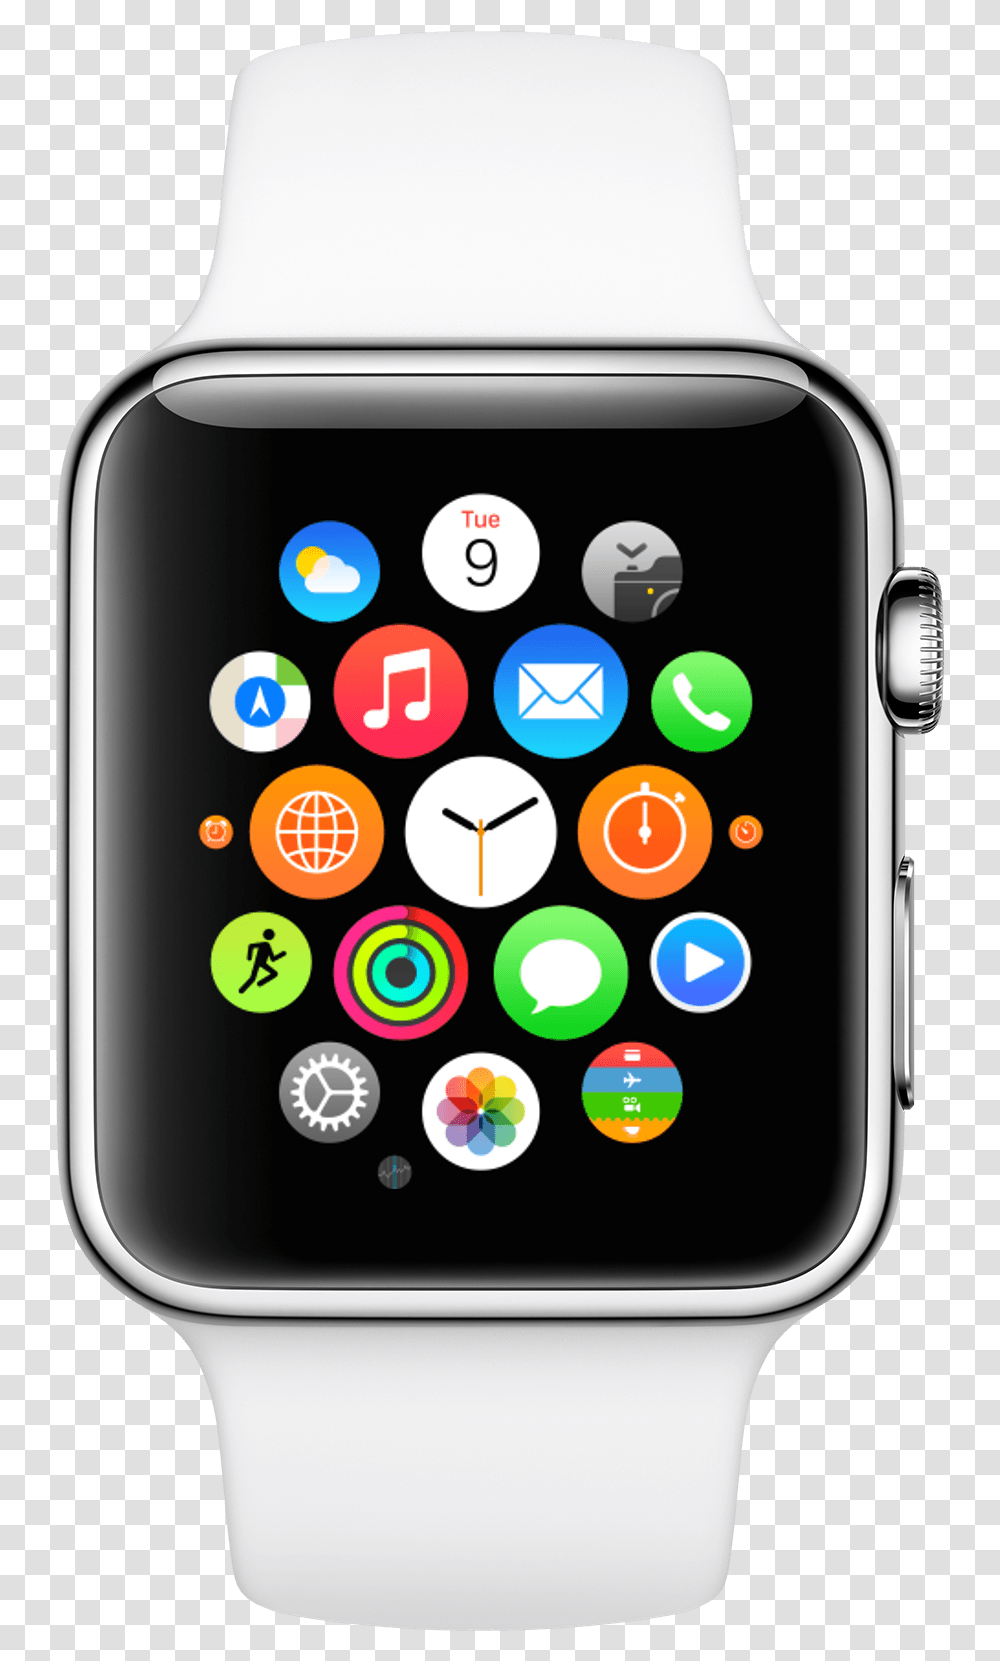 Apple Watch 3 Image Animated Apple Watch Gif, Mobile Phone, Electronics, Cell Phone, Text Transparent Png